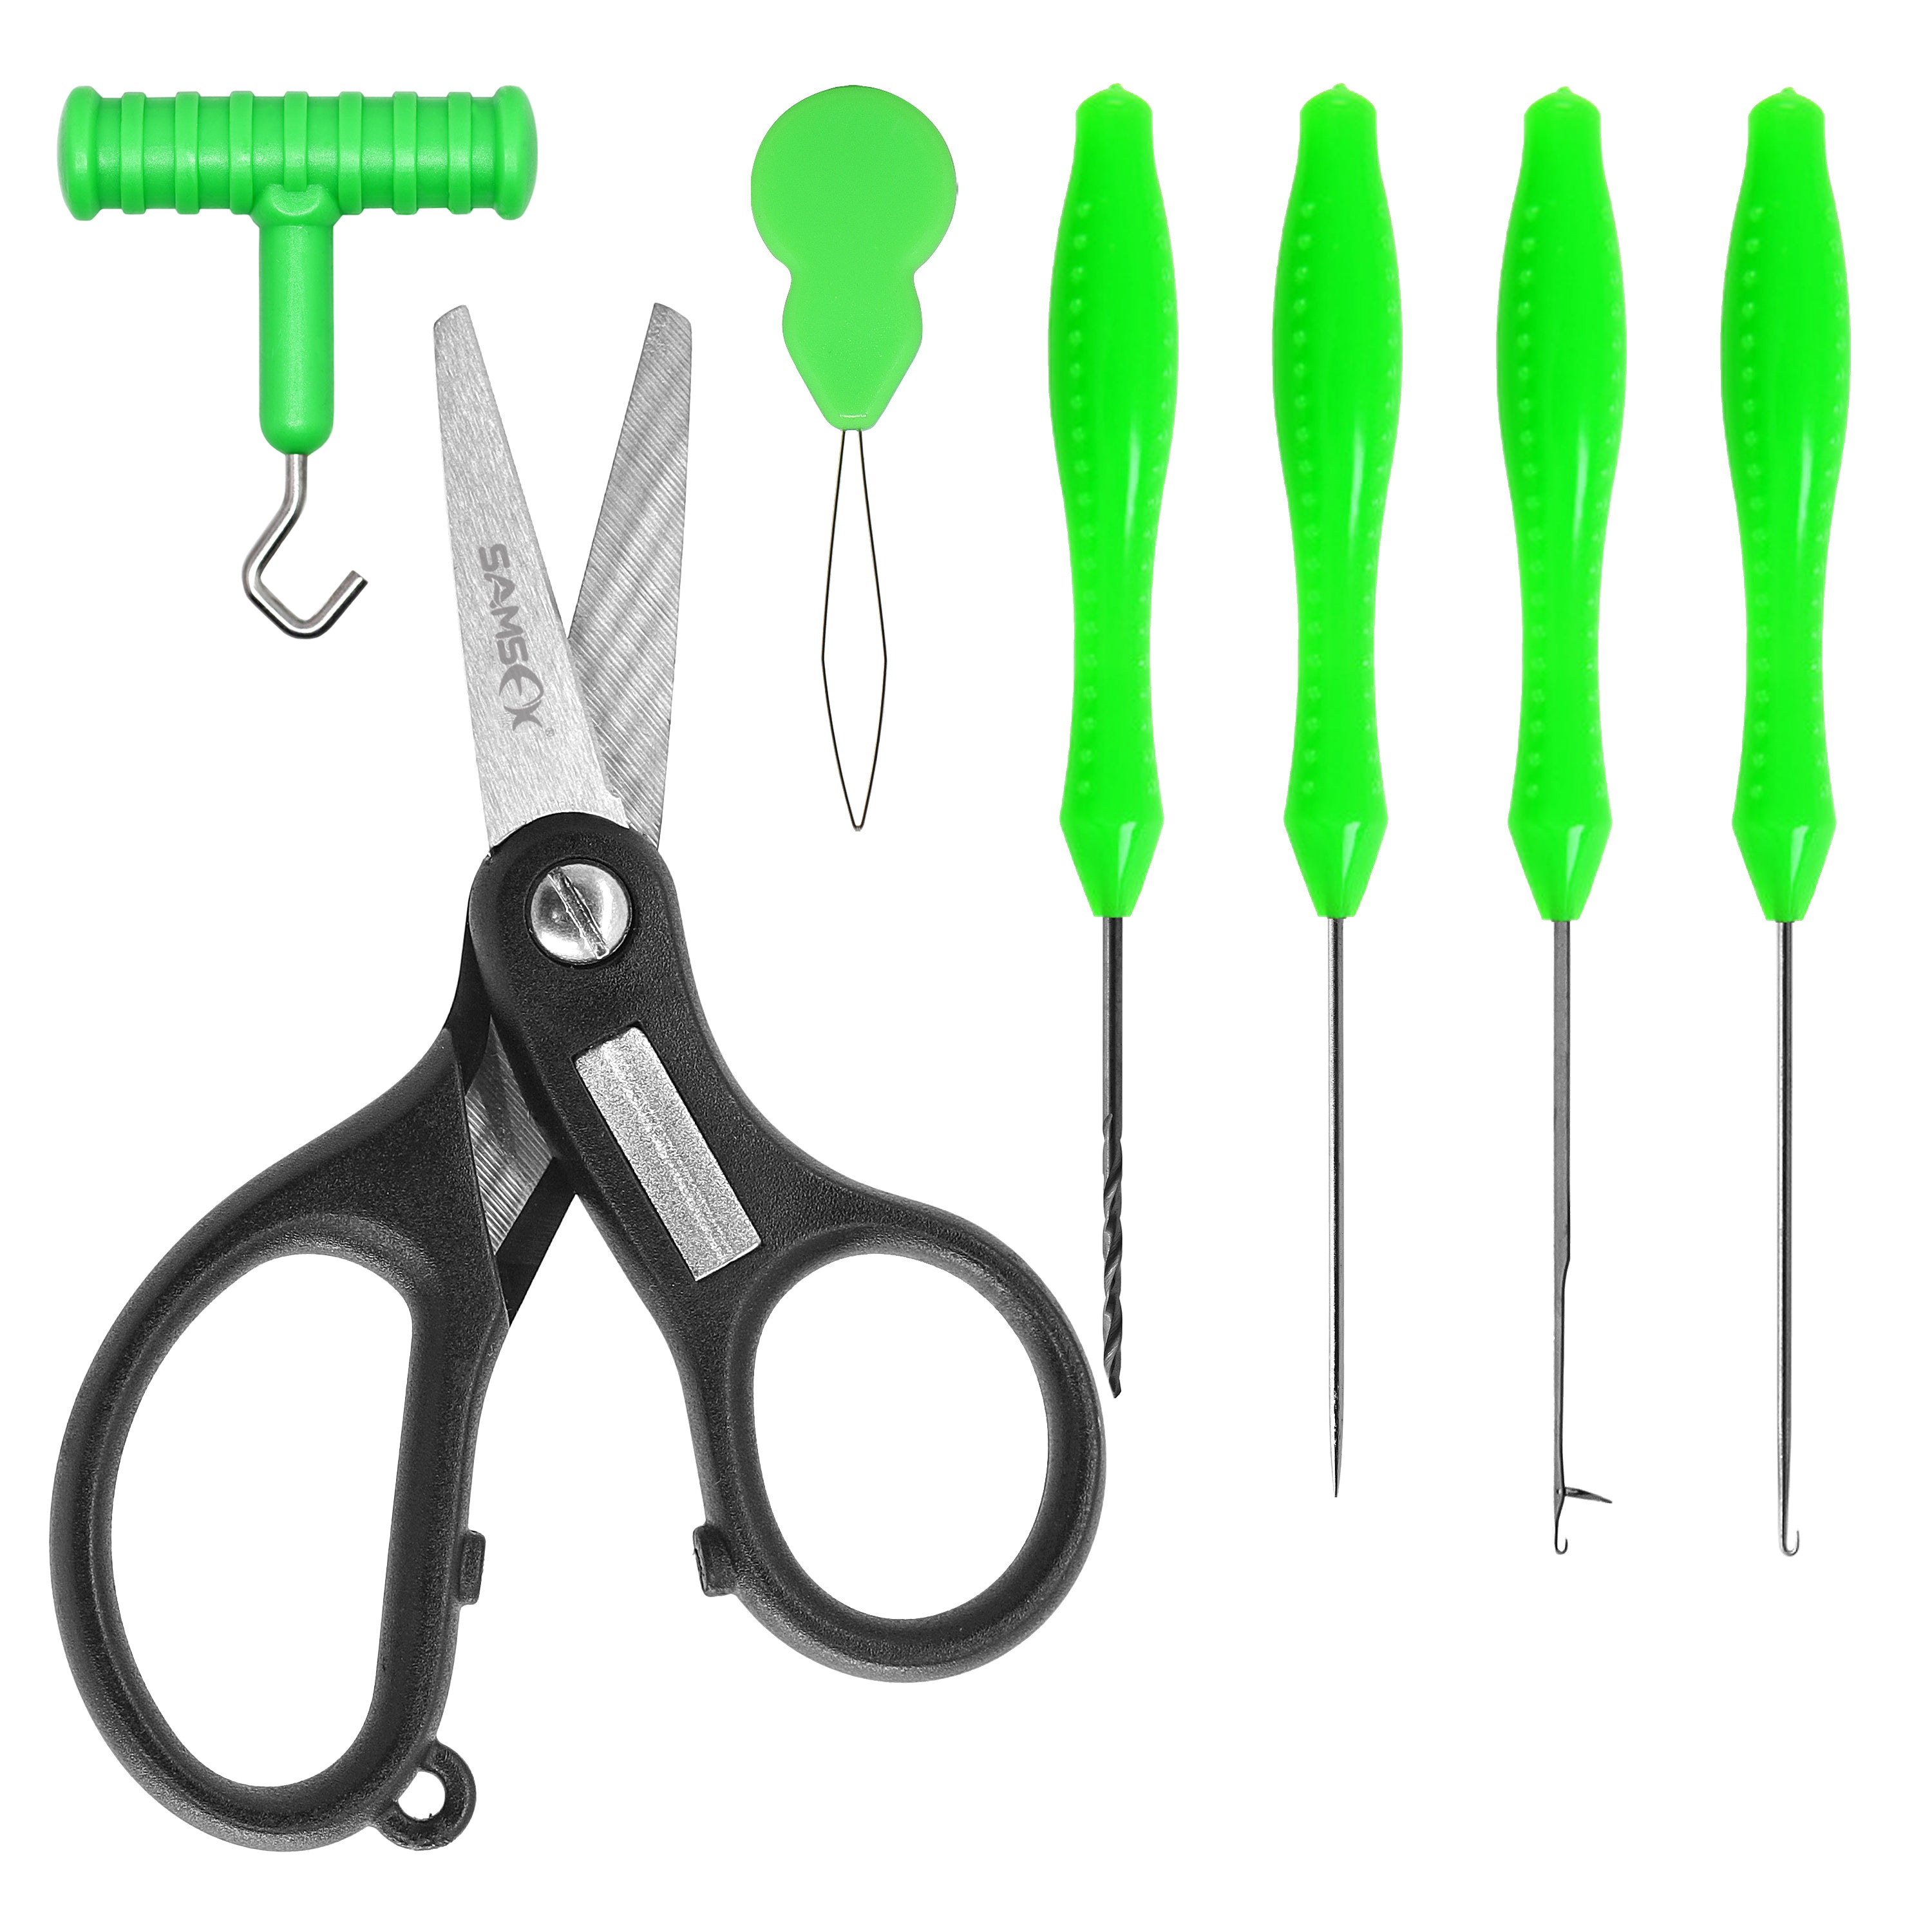 Quick Knot Tool, Loop Tyer, Hook Remover, Hair Rig Tying Tool and